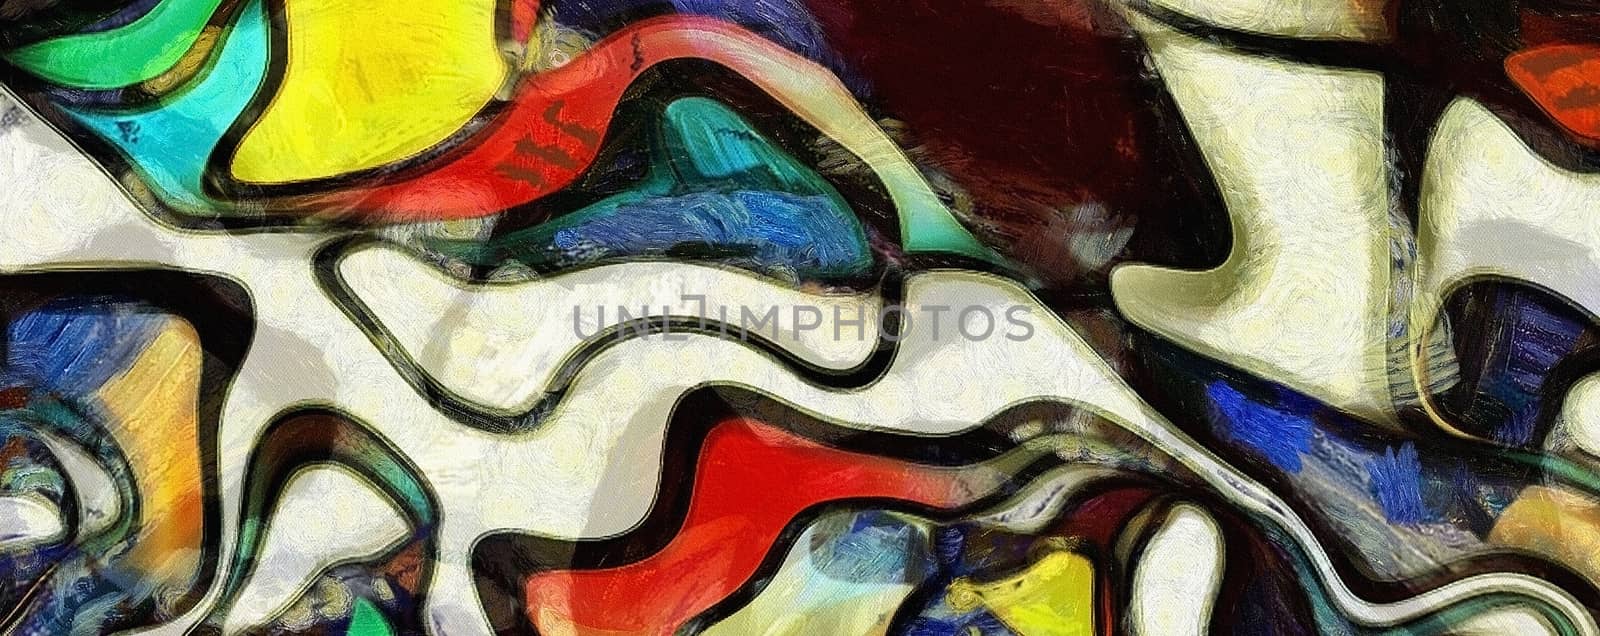 Swirling Shapes, Colors and Lines by applesstock